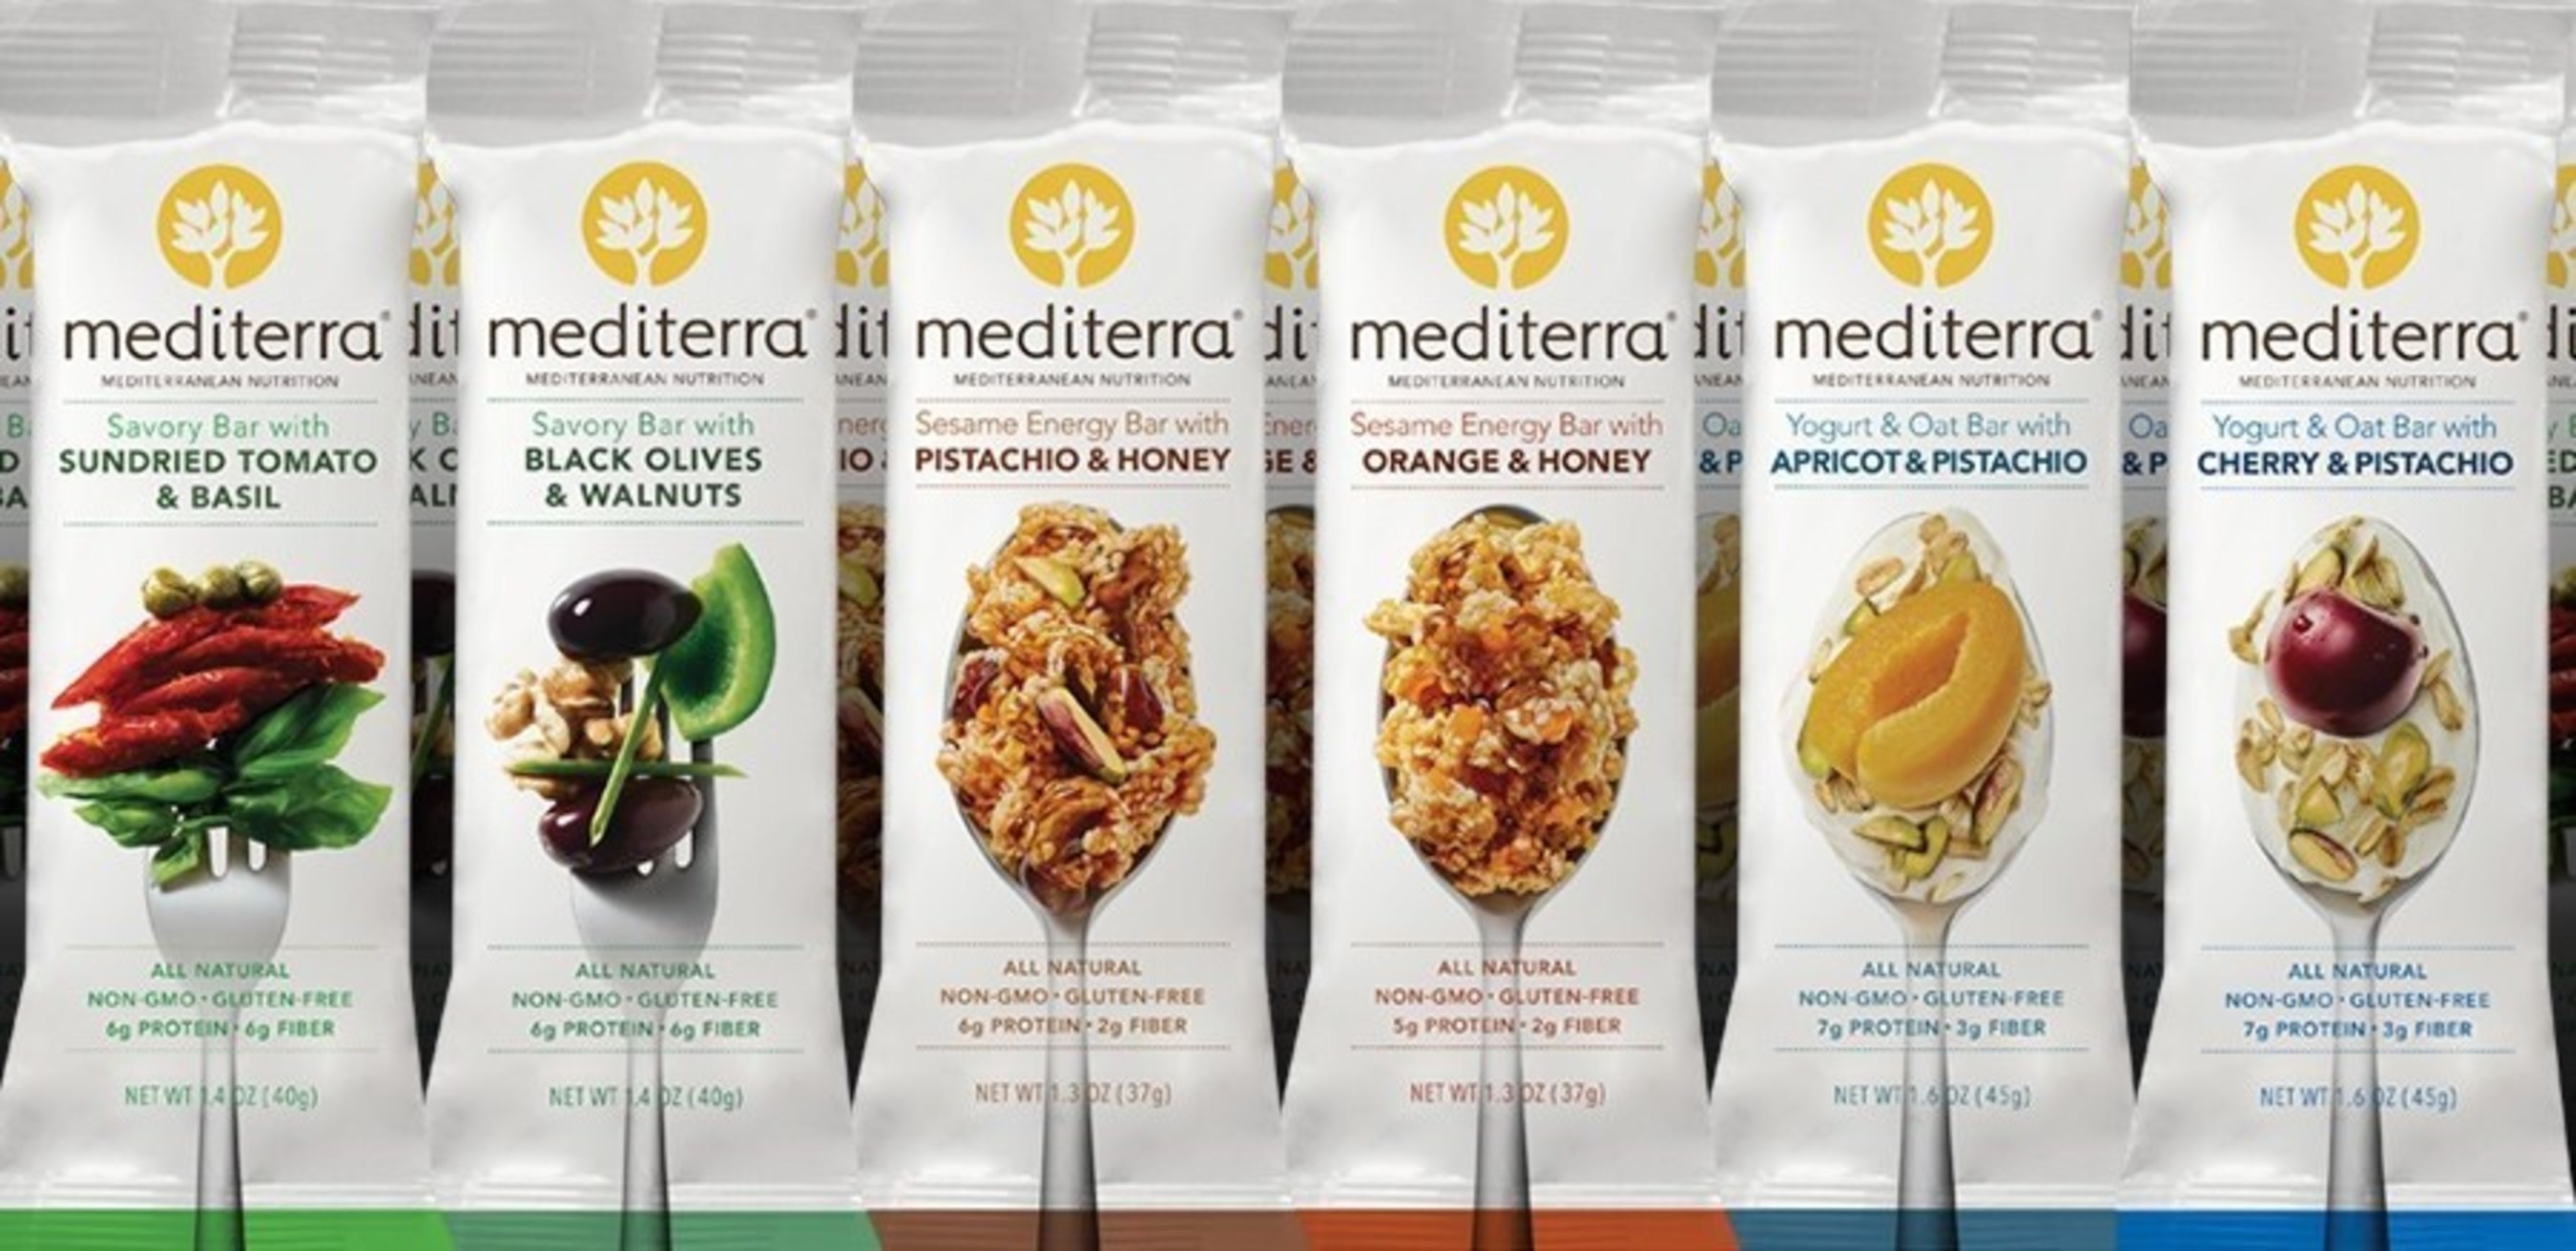 Mediterra, the first nutrition bars based on the Mediterranean Diet, makes its Target stores debut. The six various bar flavors feature fruits, vegetables, seeds and grains native to the Mediterranean region. The bars are all-natural, non-GMO and Gluten-Free.